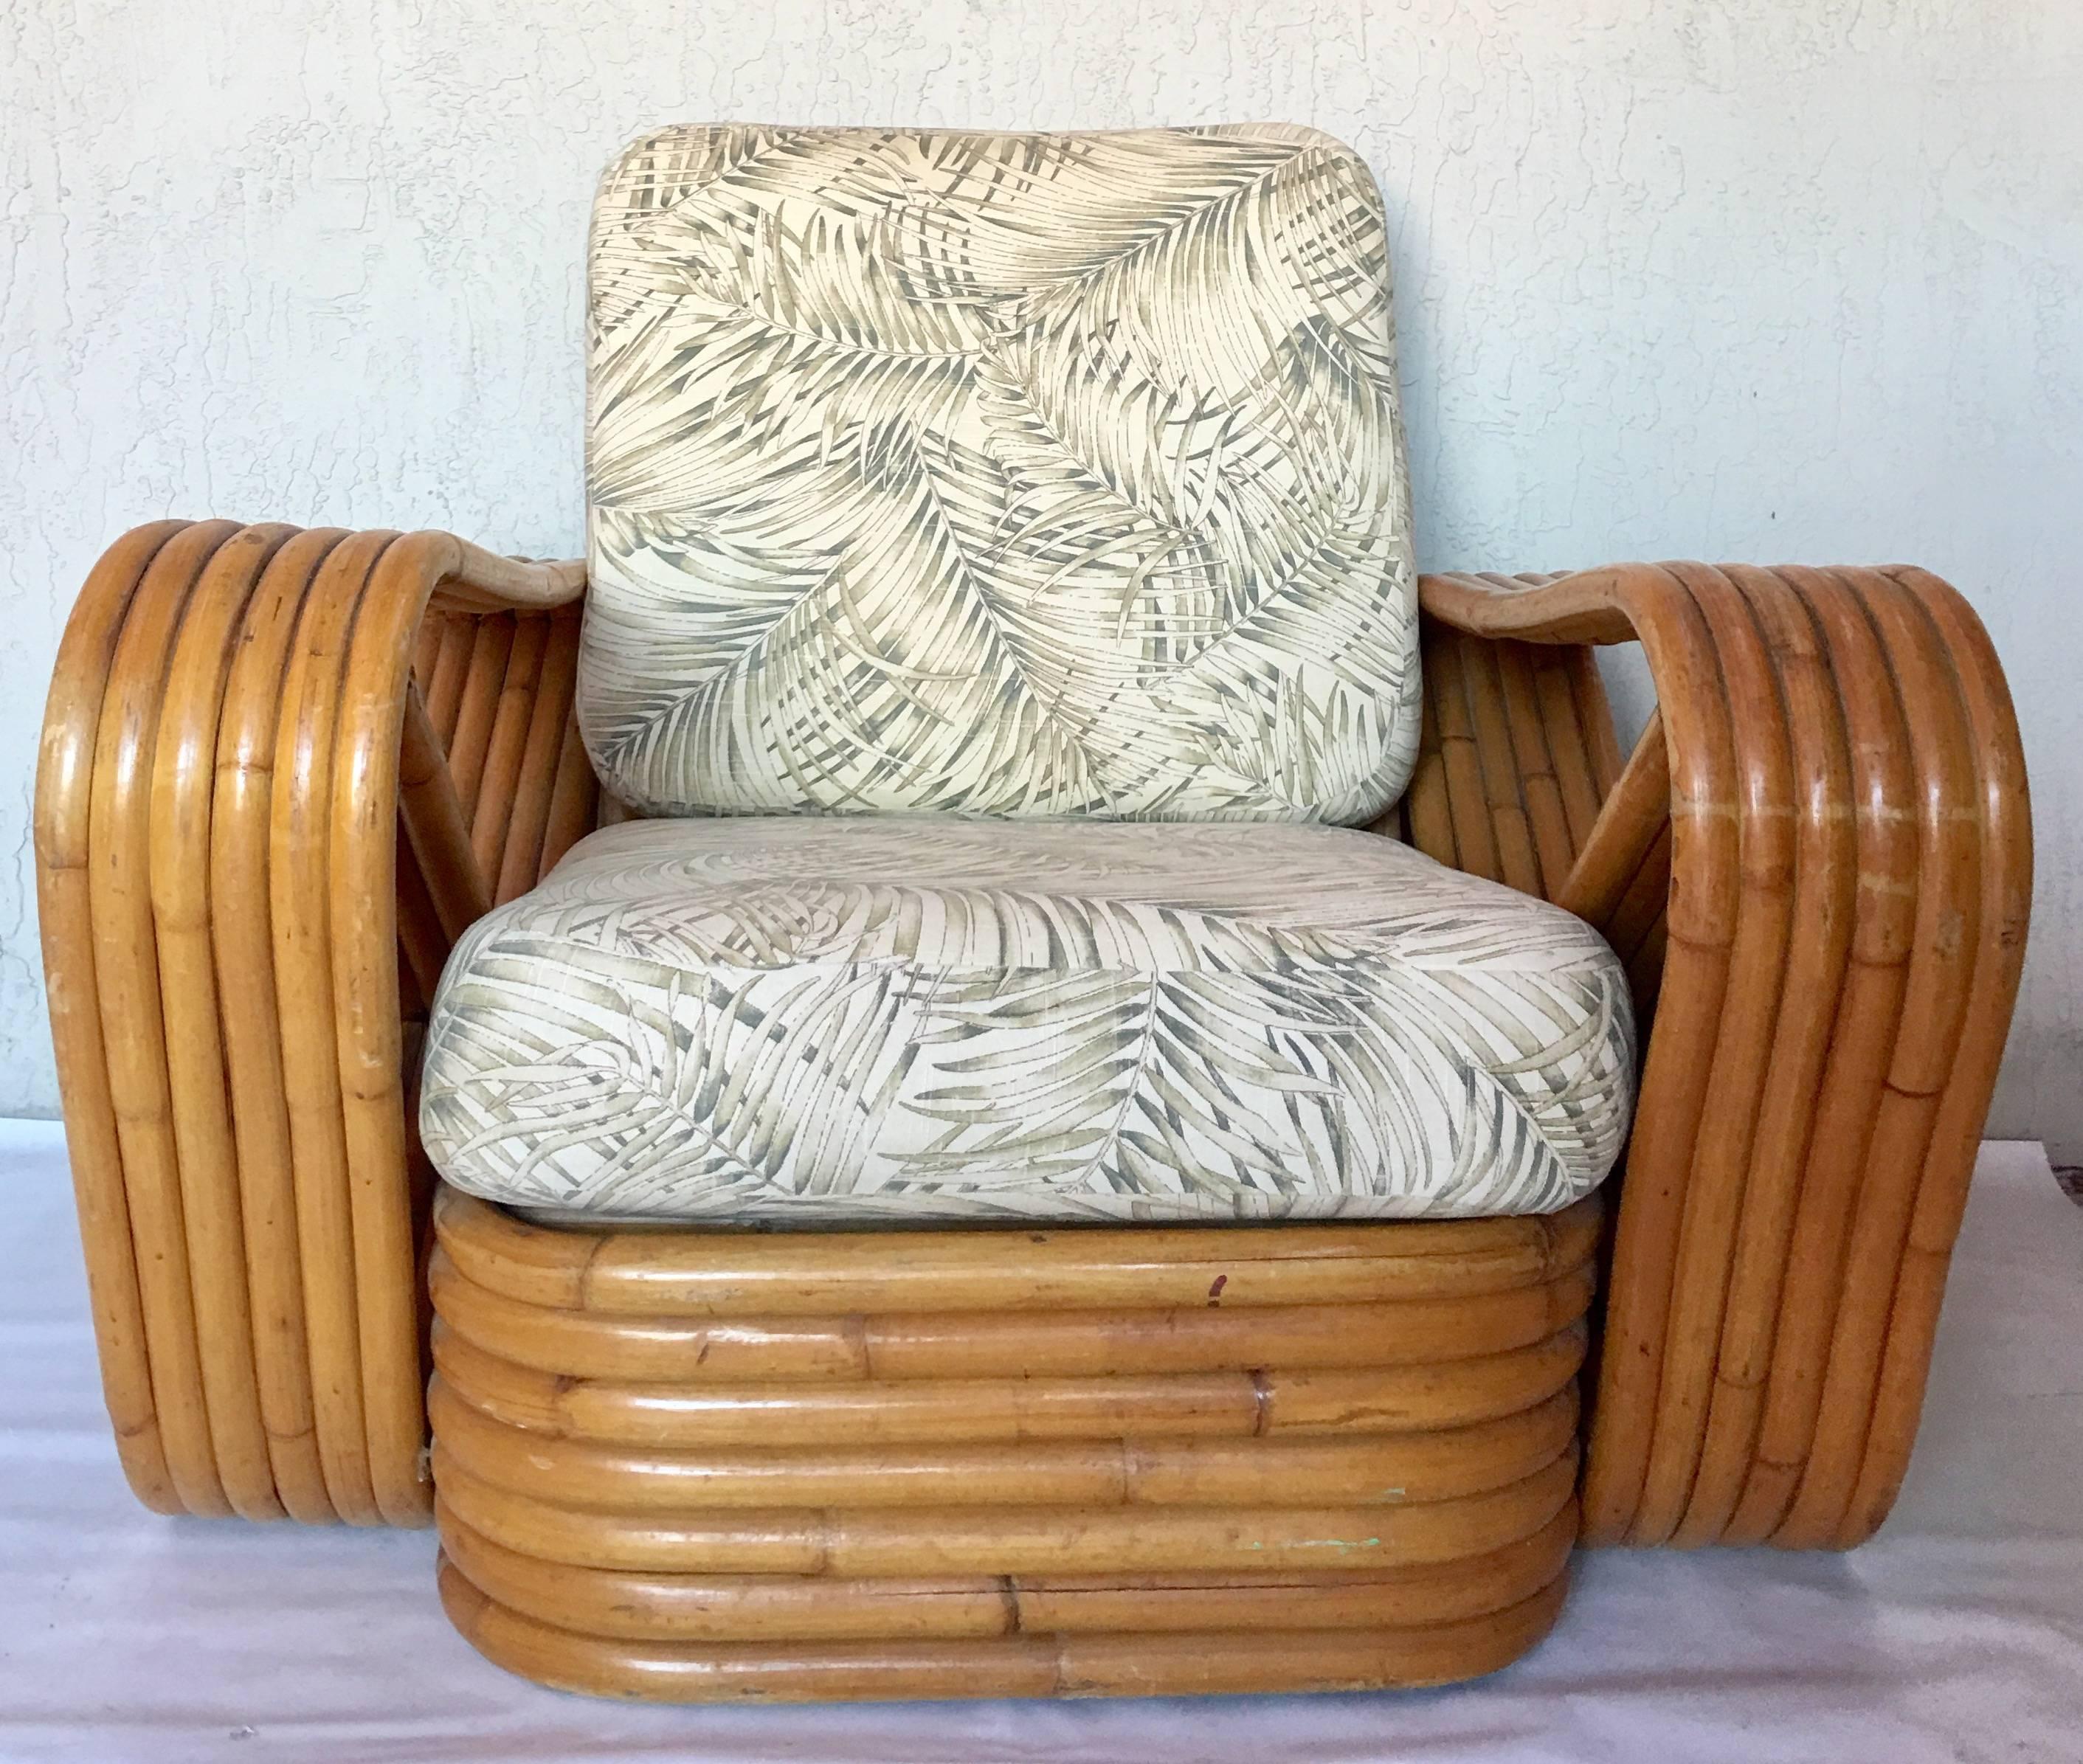 1940s Paul Frankl designed rattan reed six-stack square "Pretzel" style armchair and seven reed stack base ottoman. Ottoman measures, 21.5" square and 9" inches in height.
Includes two original fern motif zipper slip covered